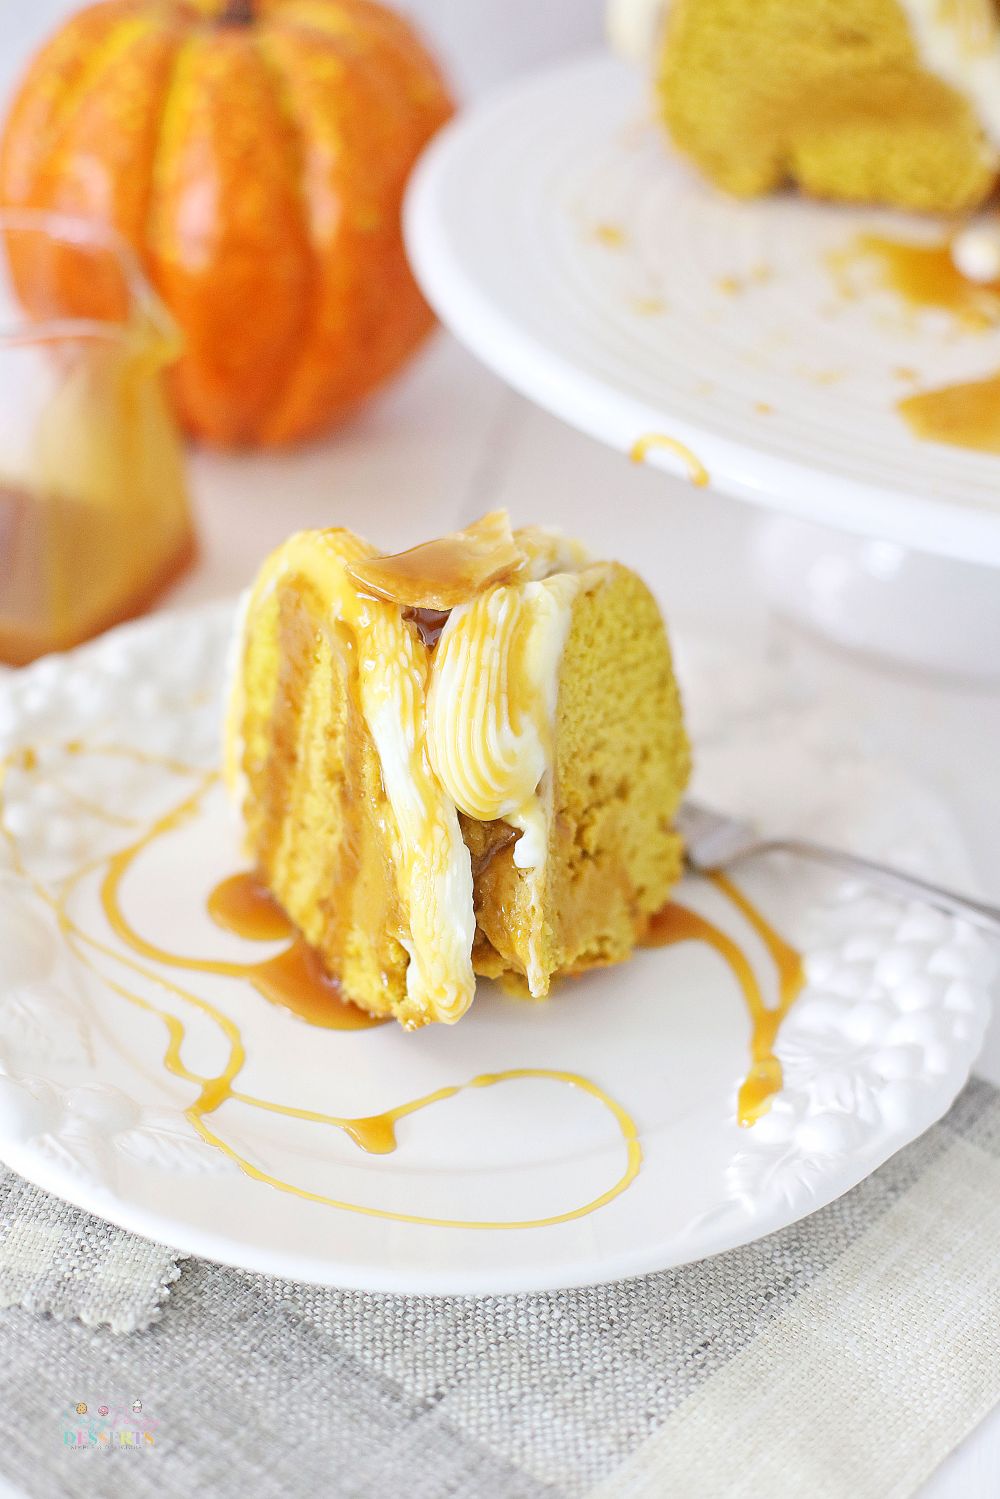 Image of a slice of pumpkin cake with fresh pumpkin, topped with buttercream frosting and drizzled with caramel sauce